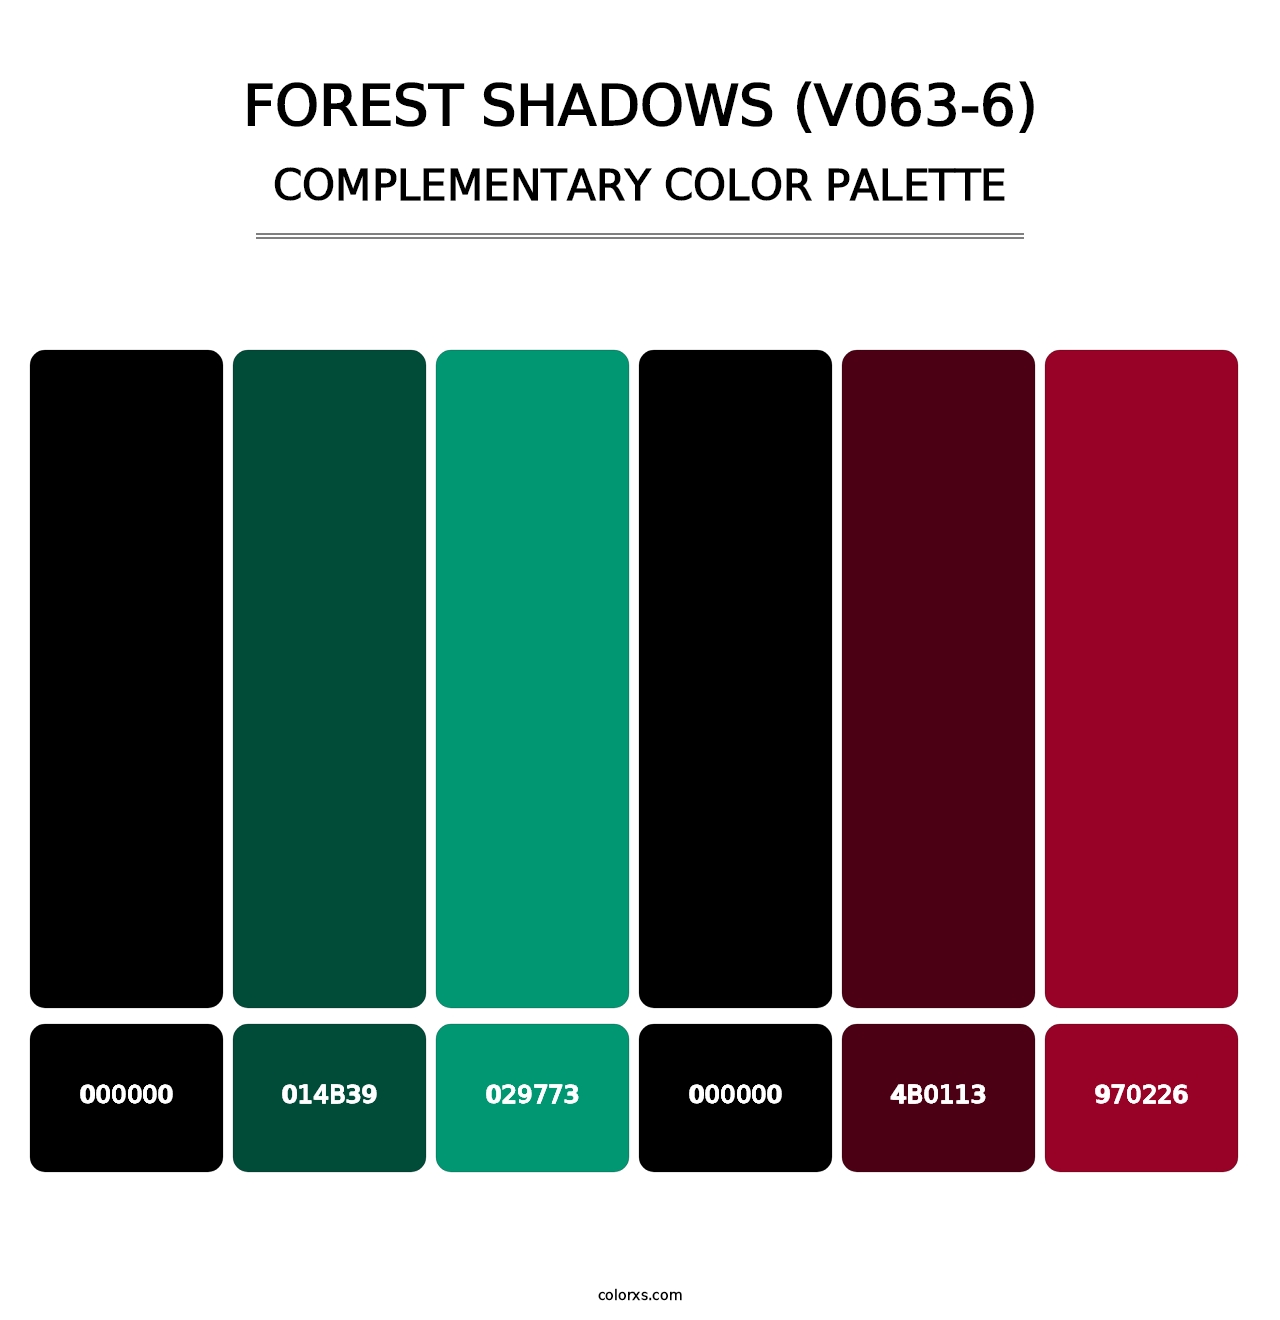 Forest Shadows (V063-6) - Complementary Color Palette